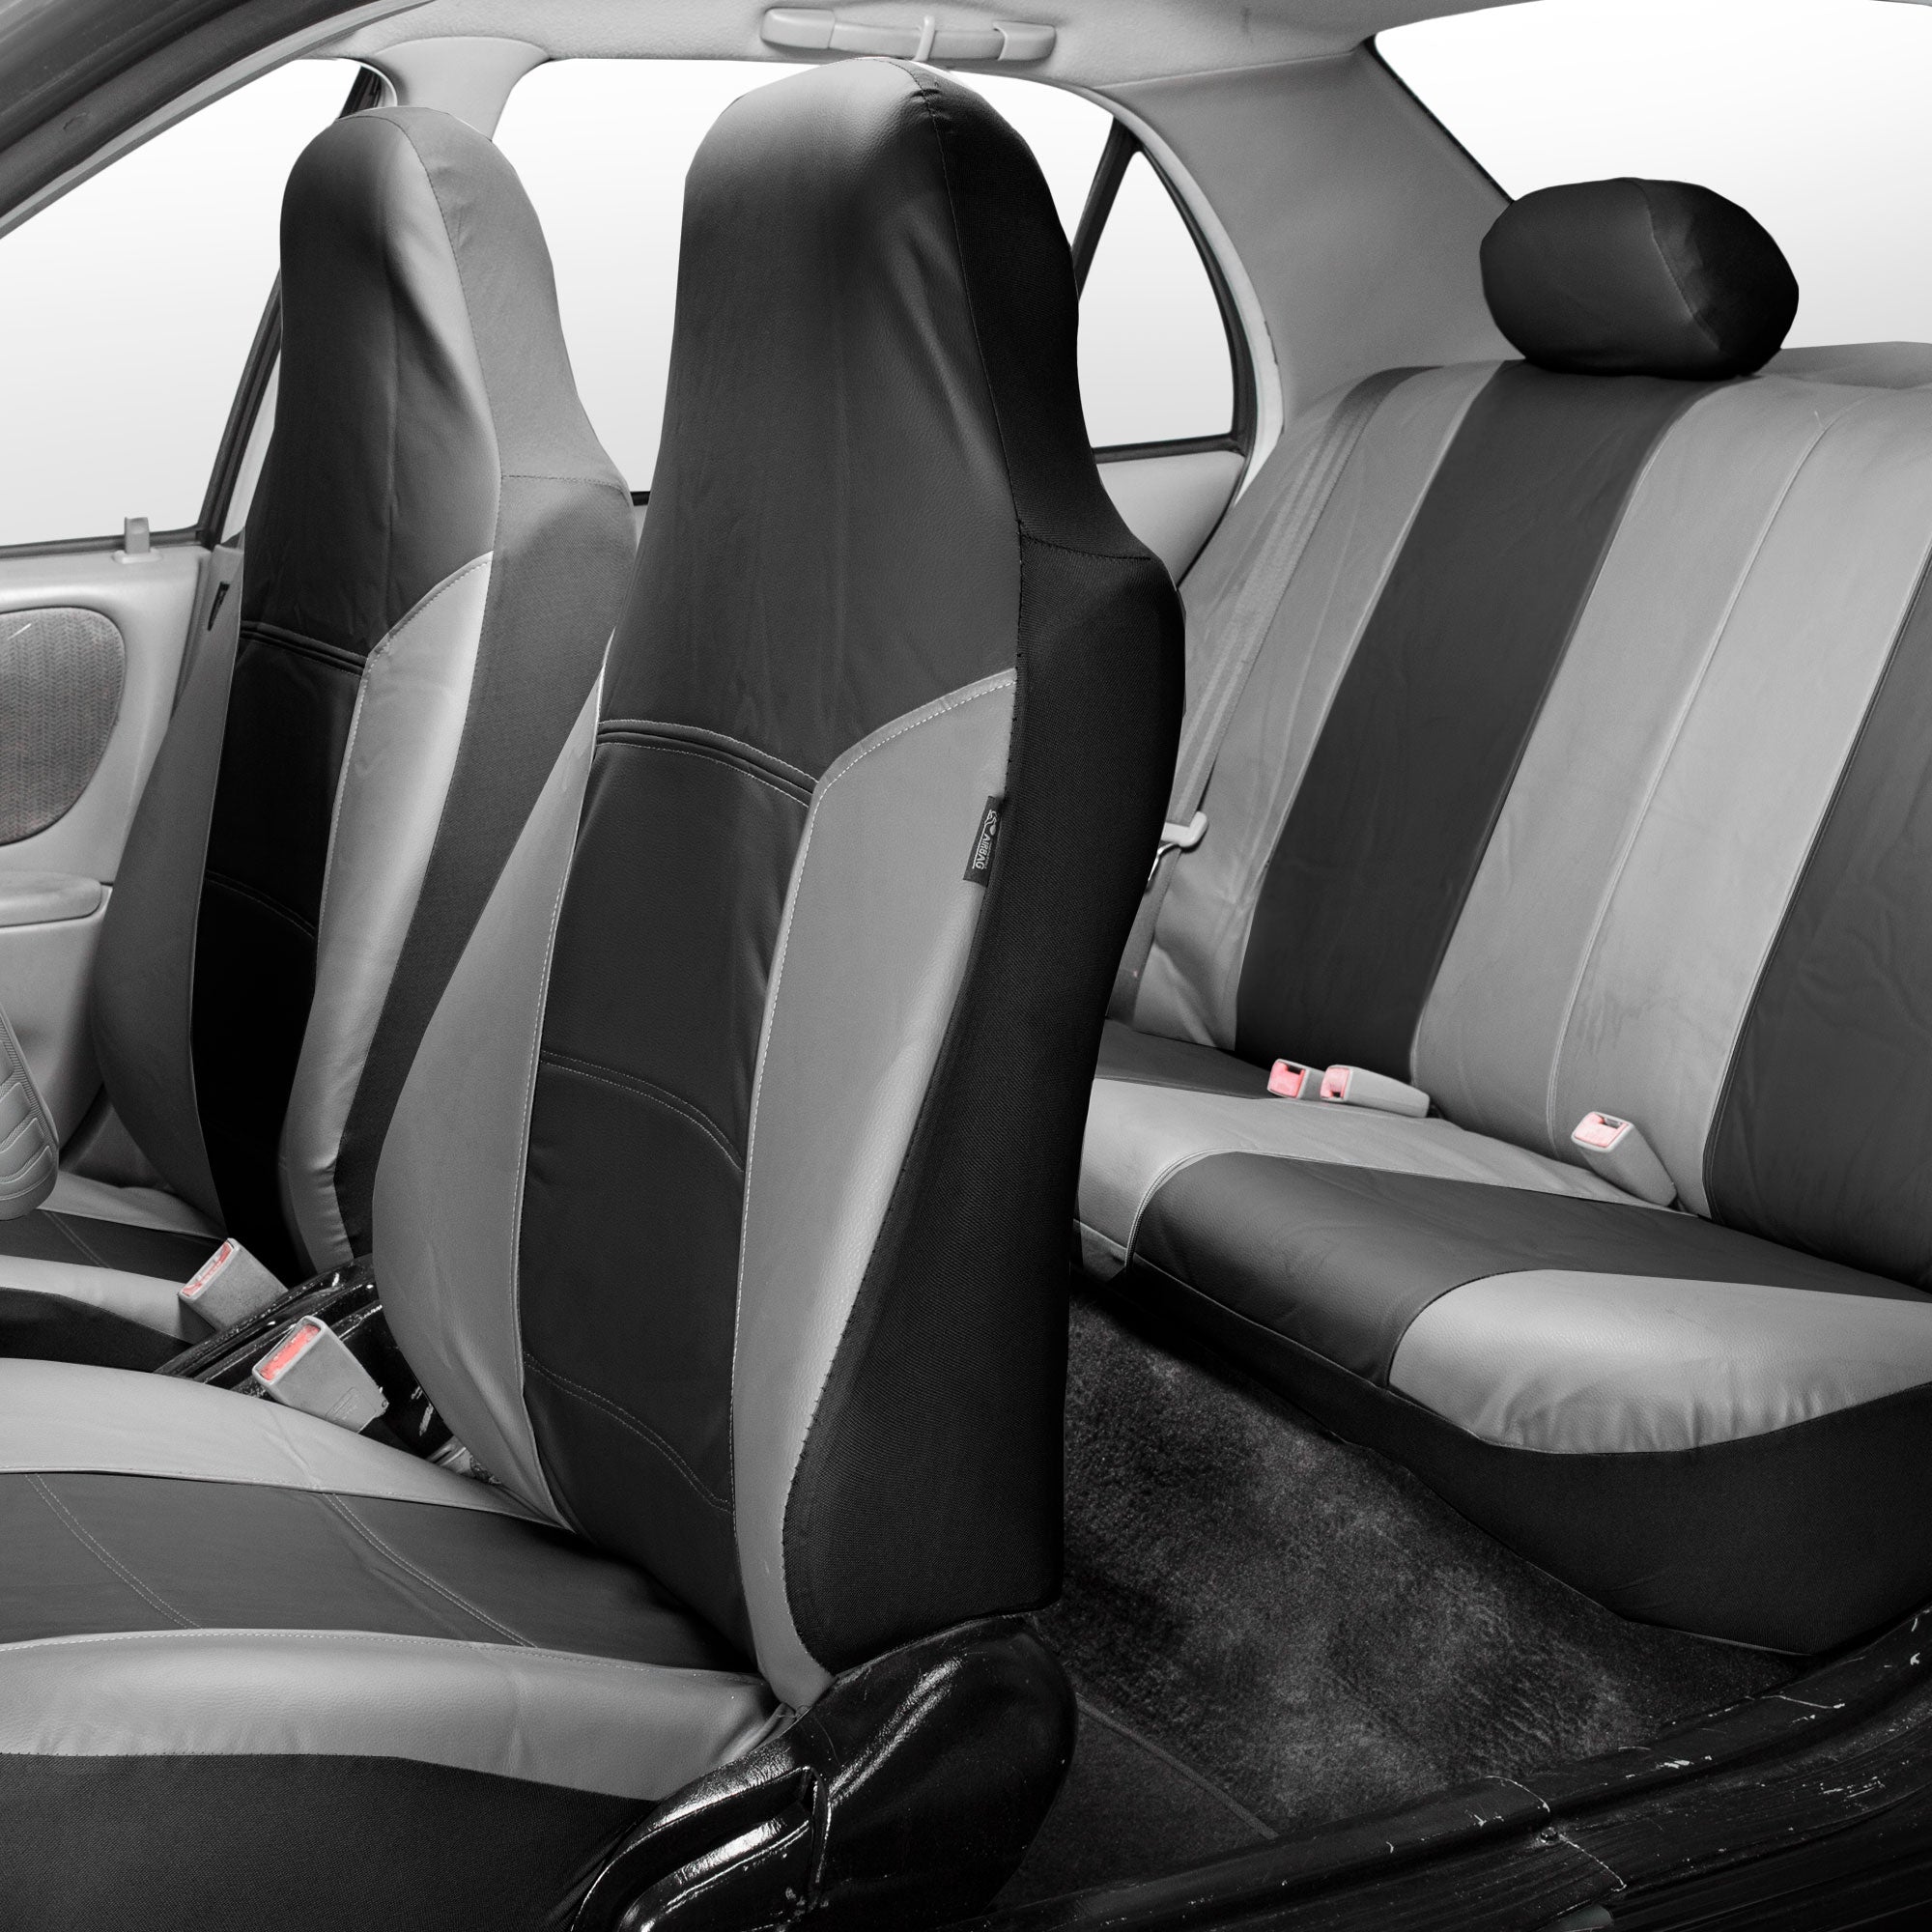 Royal PU Leather Seat Covers Full Set Gray / Black